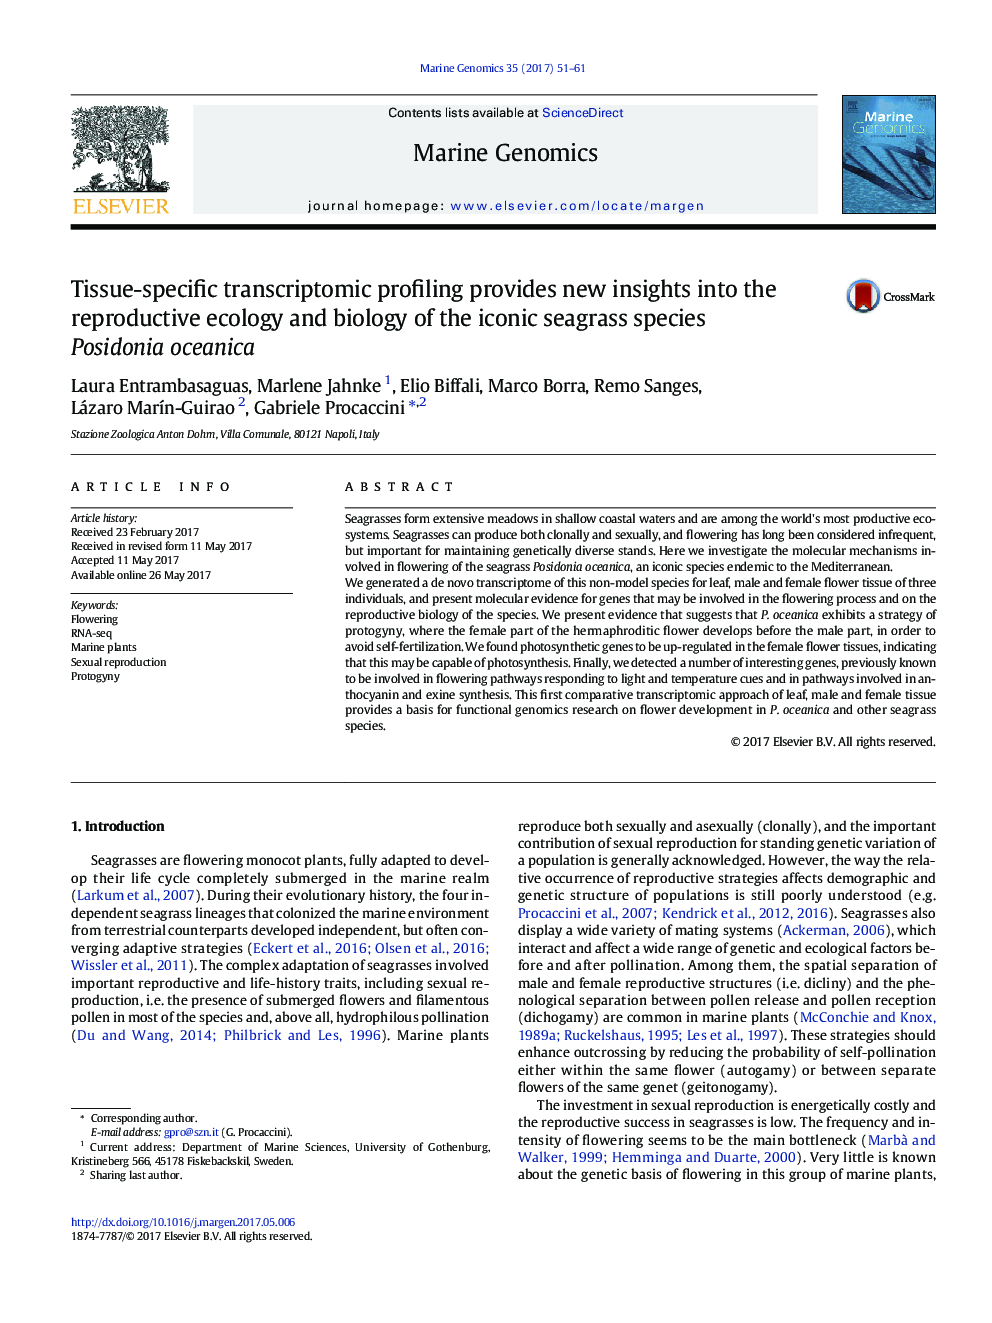 Tissue-specific transcriptomic profiling provides new insights into the reproductive ecology and biology of the iconic seagrass species Posidonia oceanica